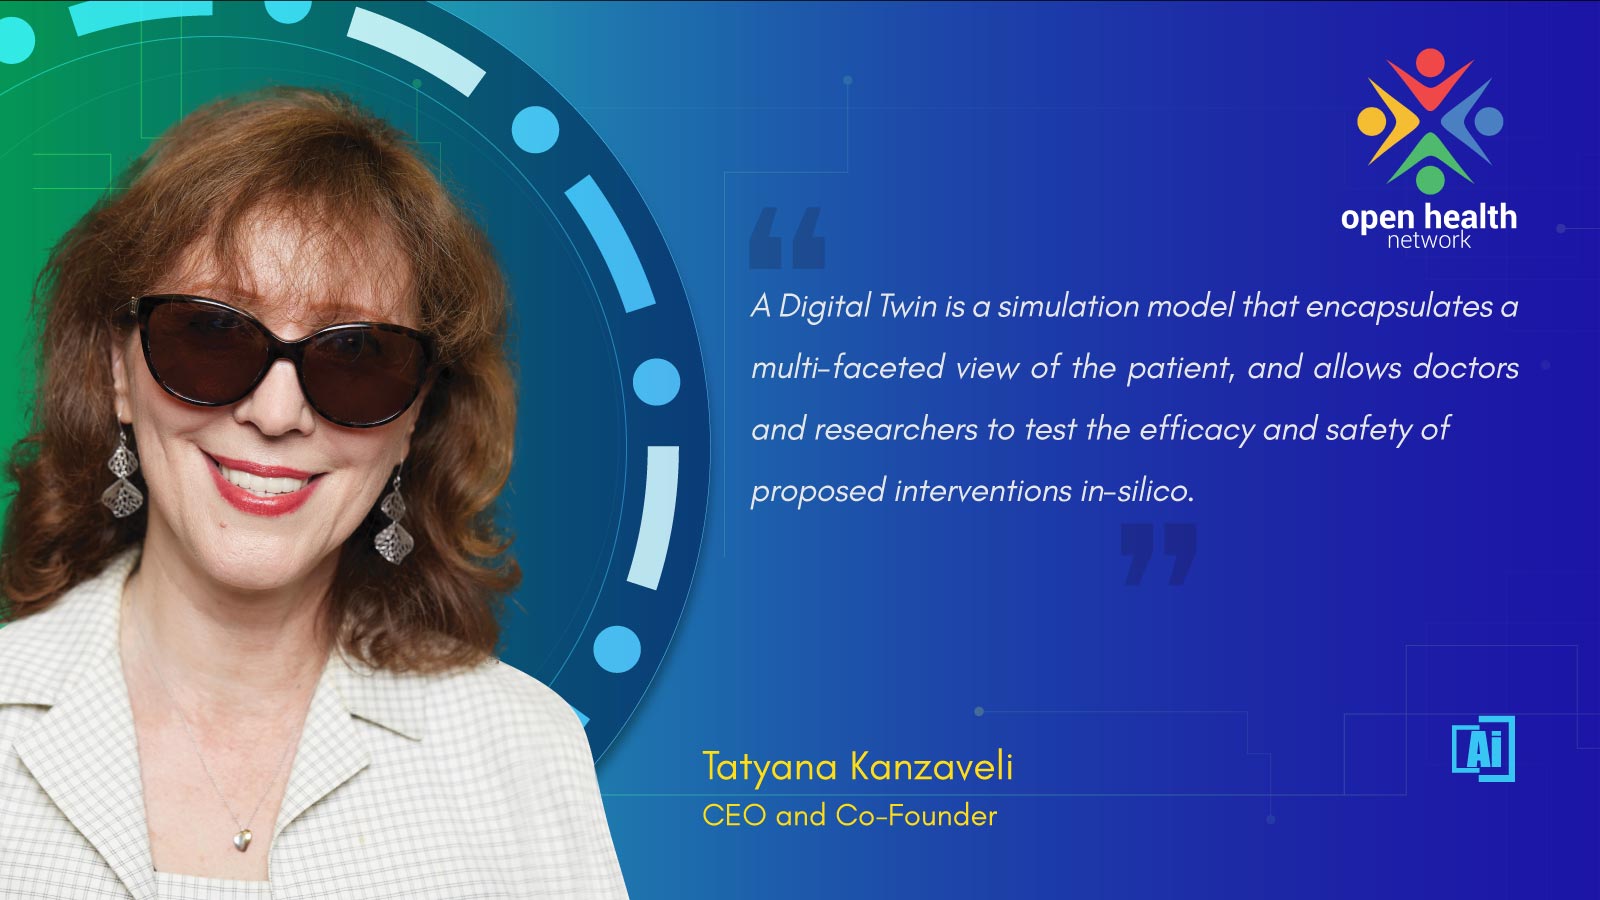 Tatyana Kanzaveli, CEO and Co-founder at Open Health Network